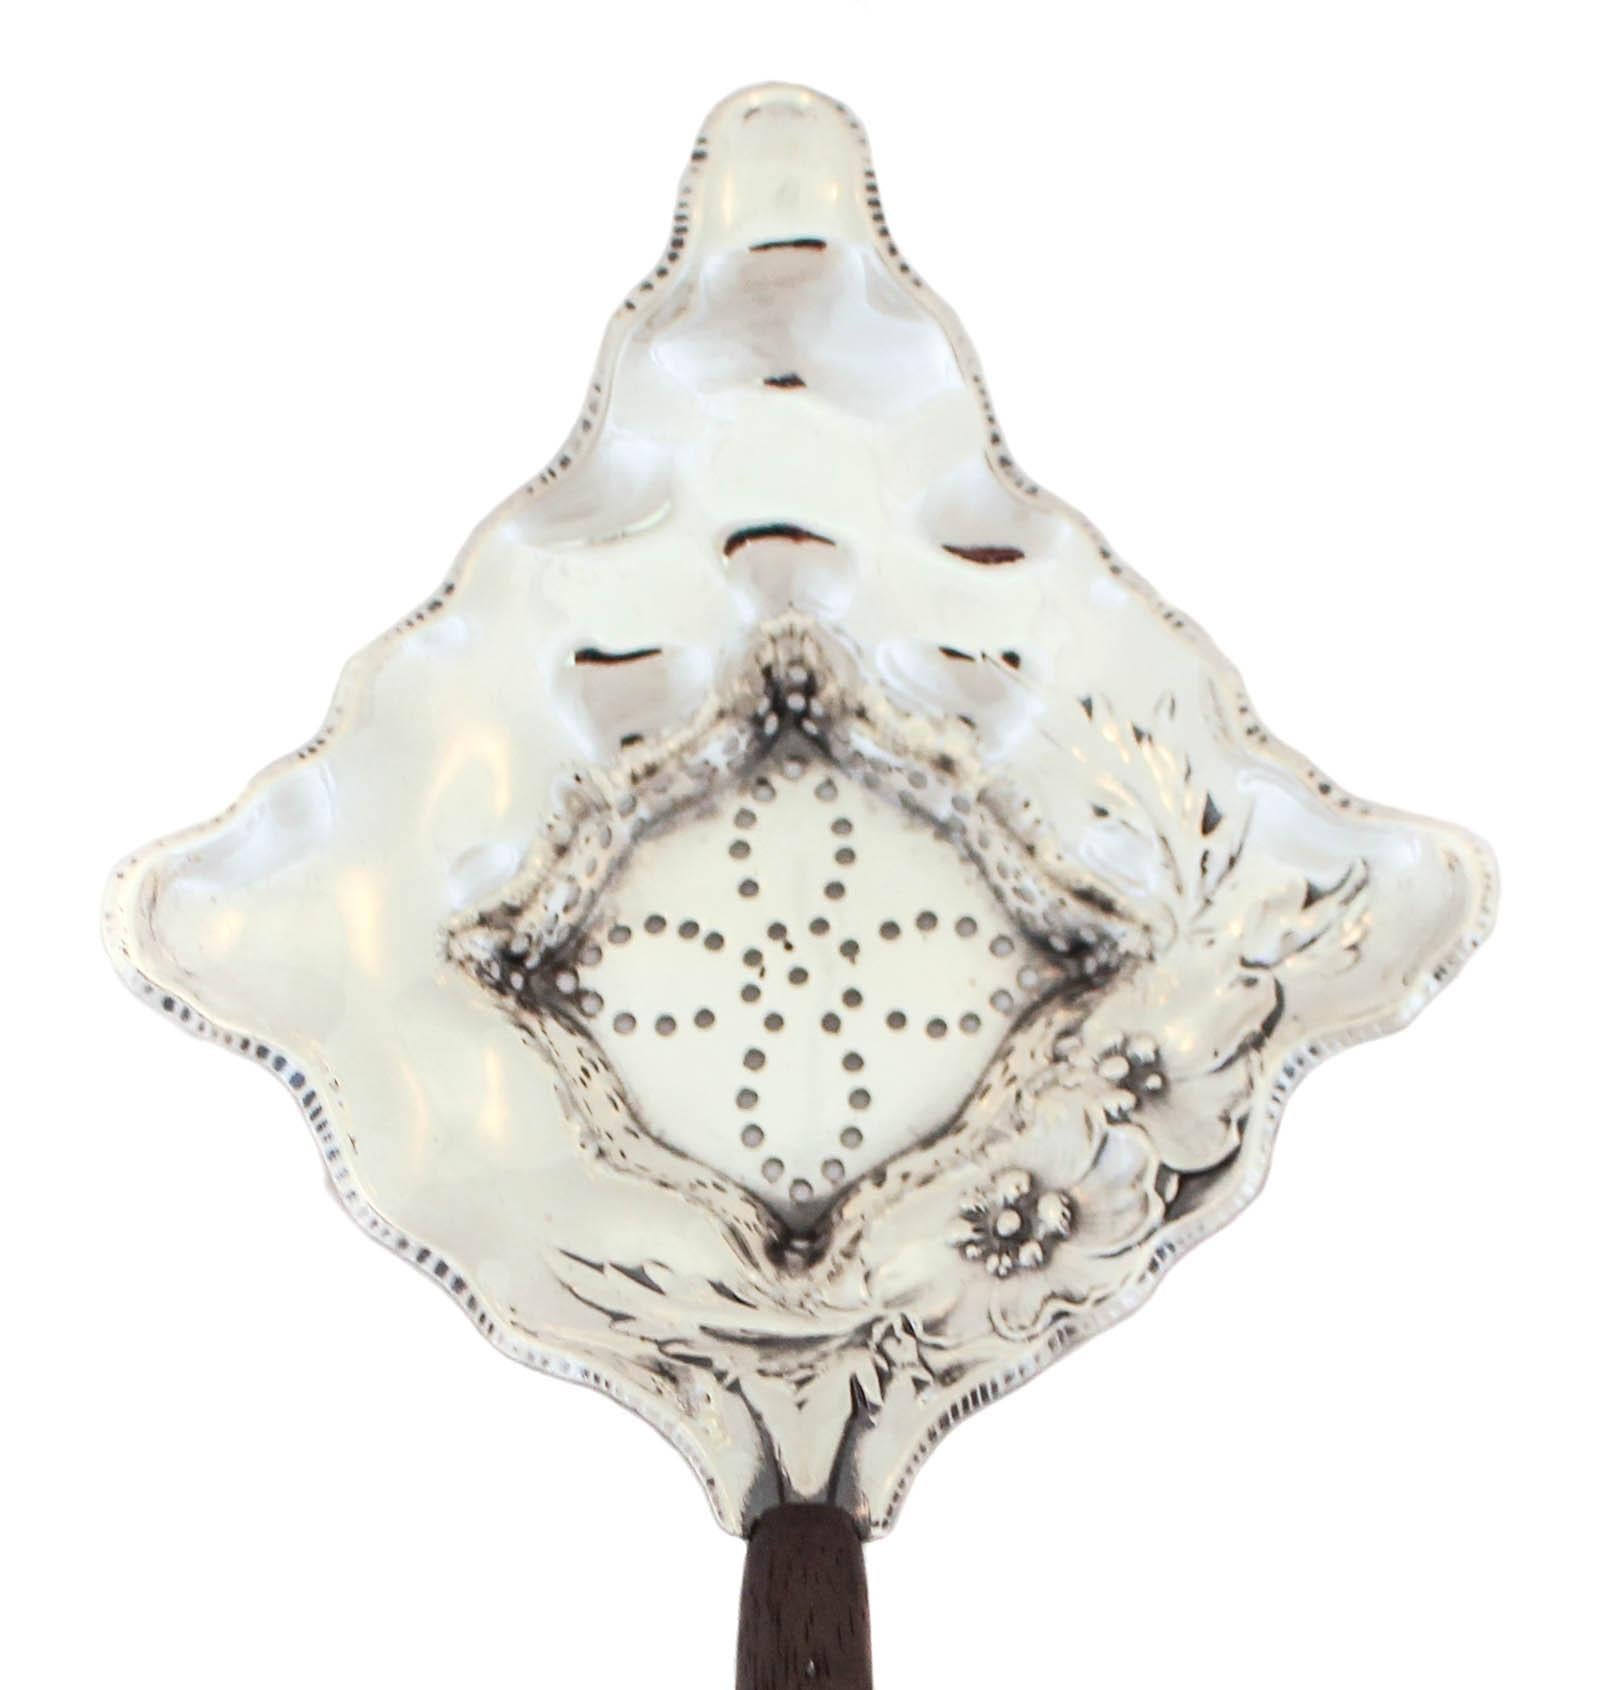 If you’re serious about your tea like I am, you’re going to love this sterling silver tea strainer. It has a wood handle and the rest is sterling silver. The top part is triangular shaped and has piercing in the center. An elegant way to serve tea,